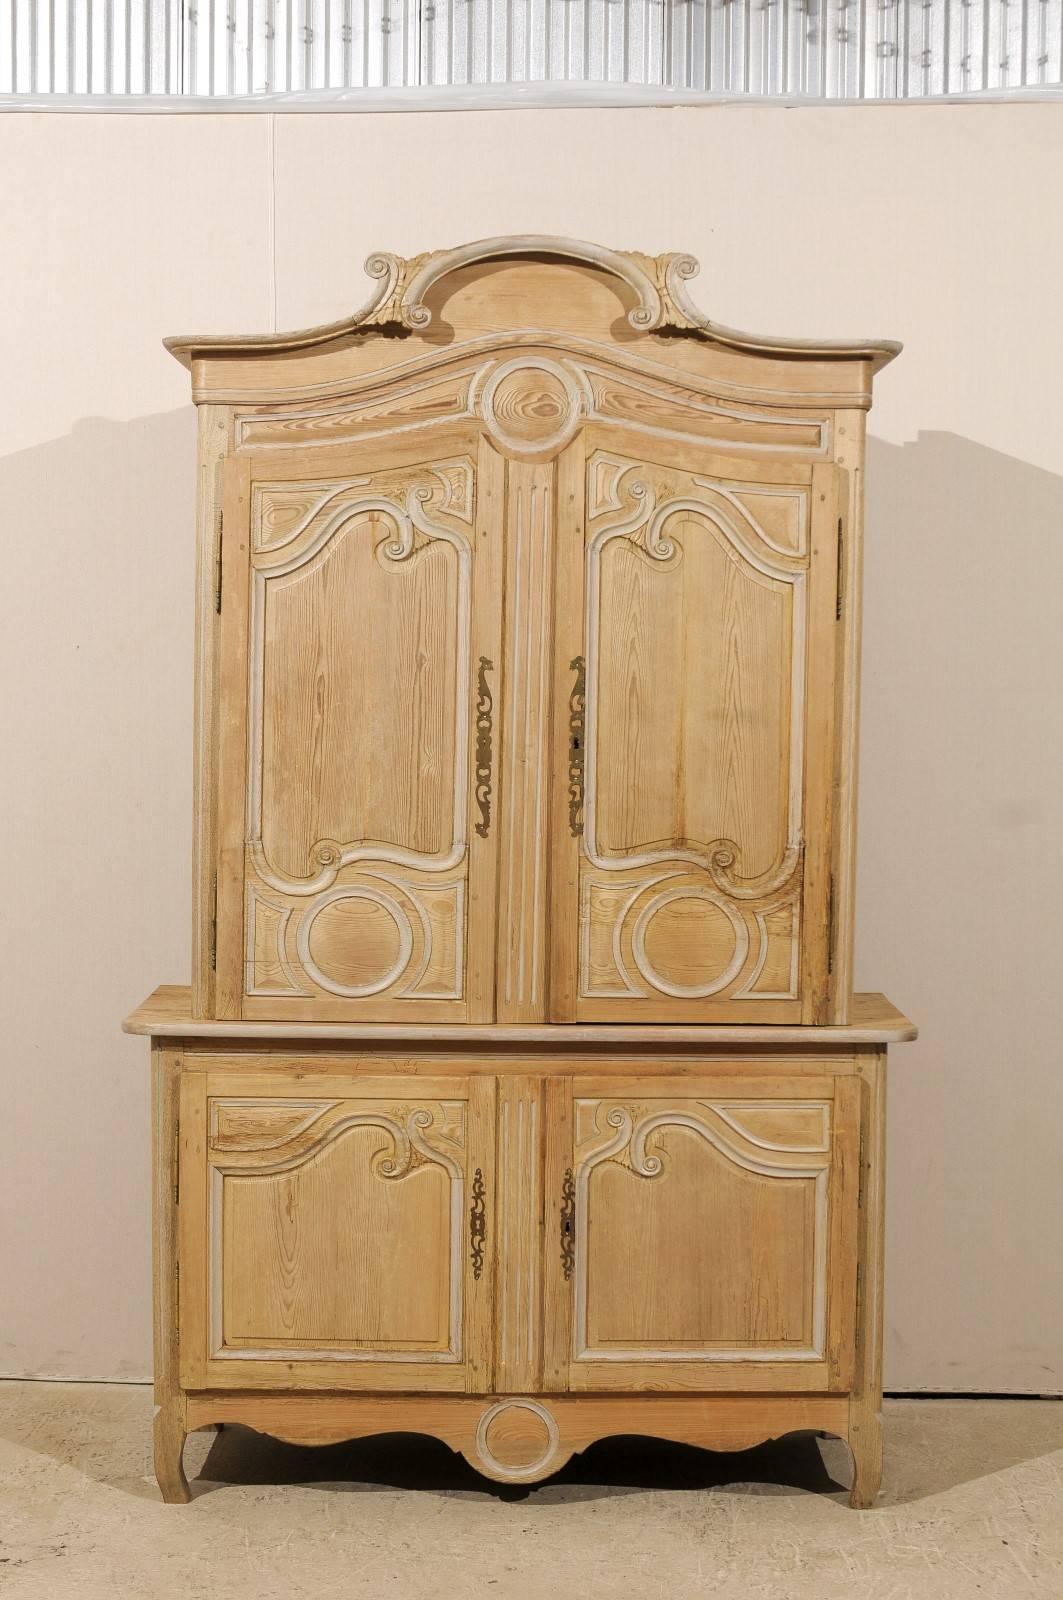 A French buffet à deux corps. This 19th century tall French cabinet has two doors over two lower doors. The pediment draws your attention up to the center with its C-scroll motif. The doors repeat the scrolling work. The section below the crest is